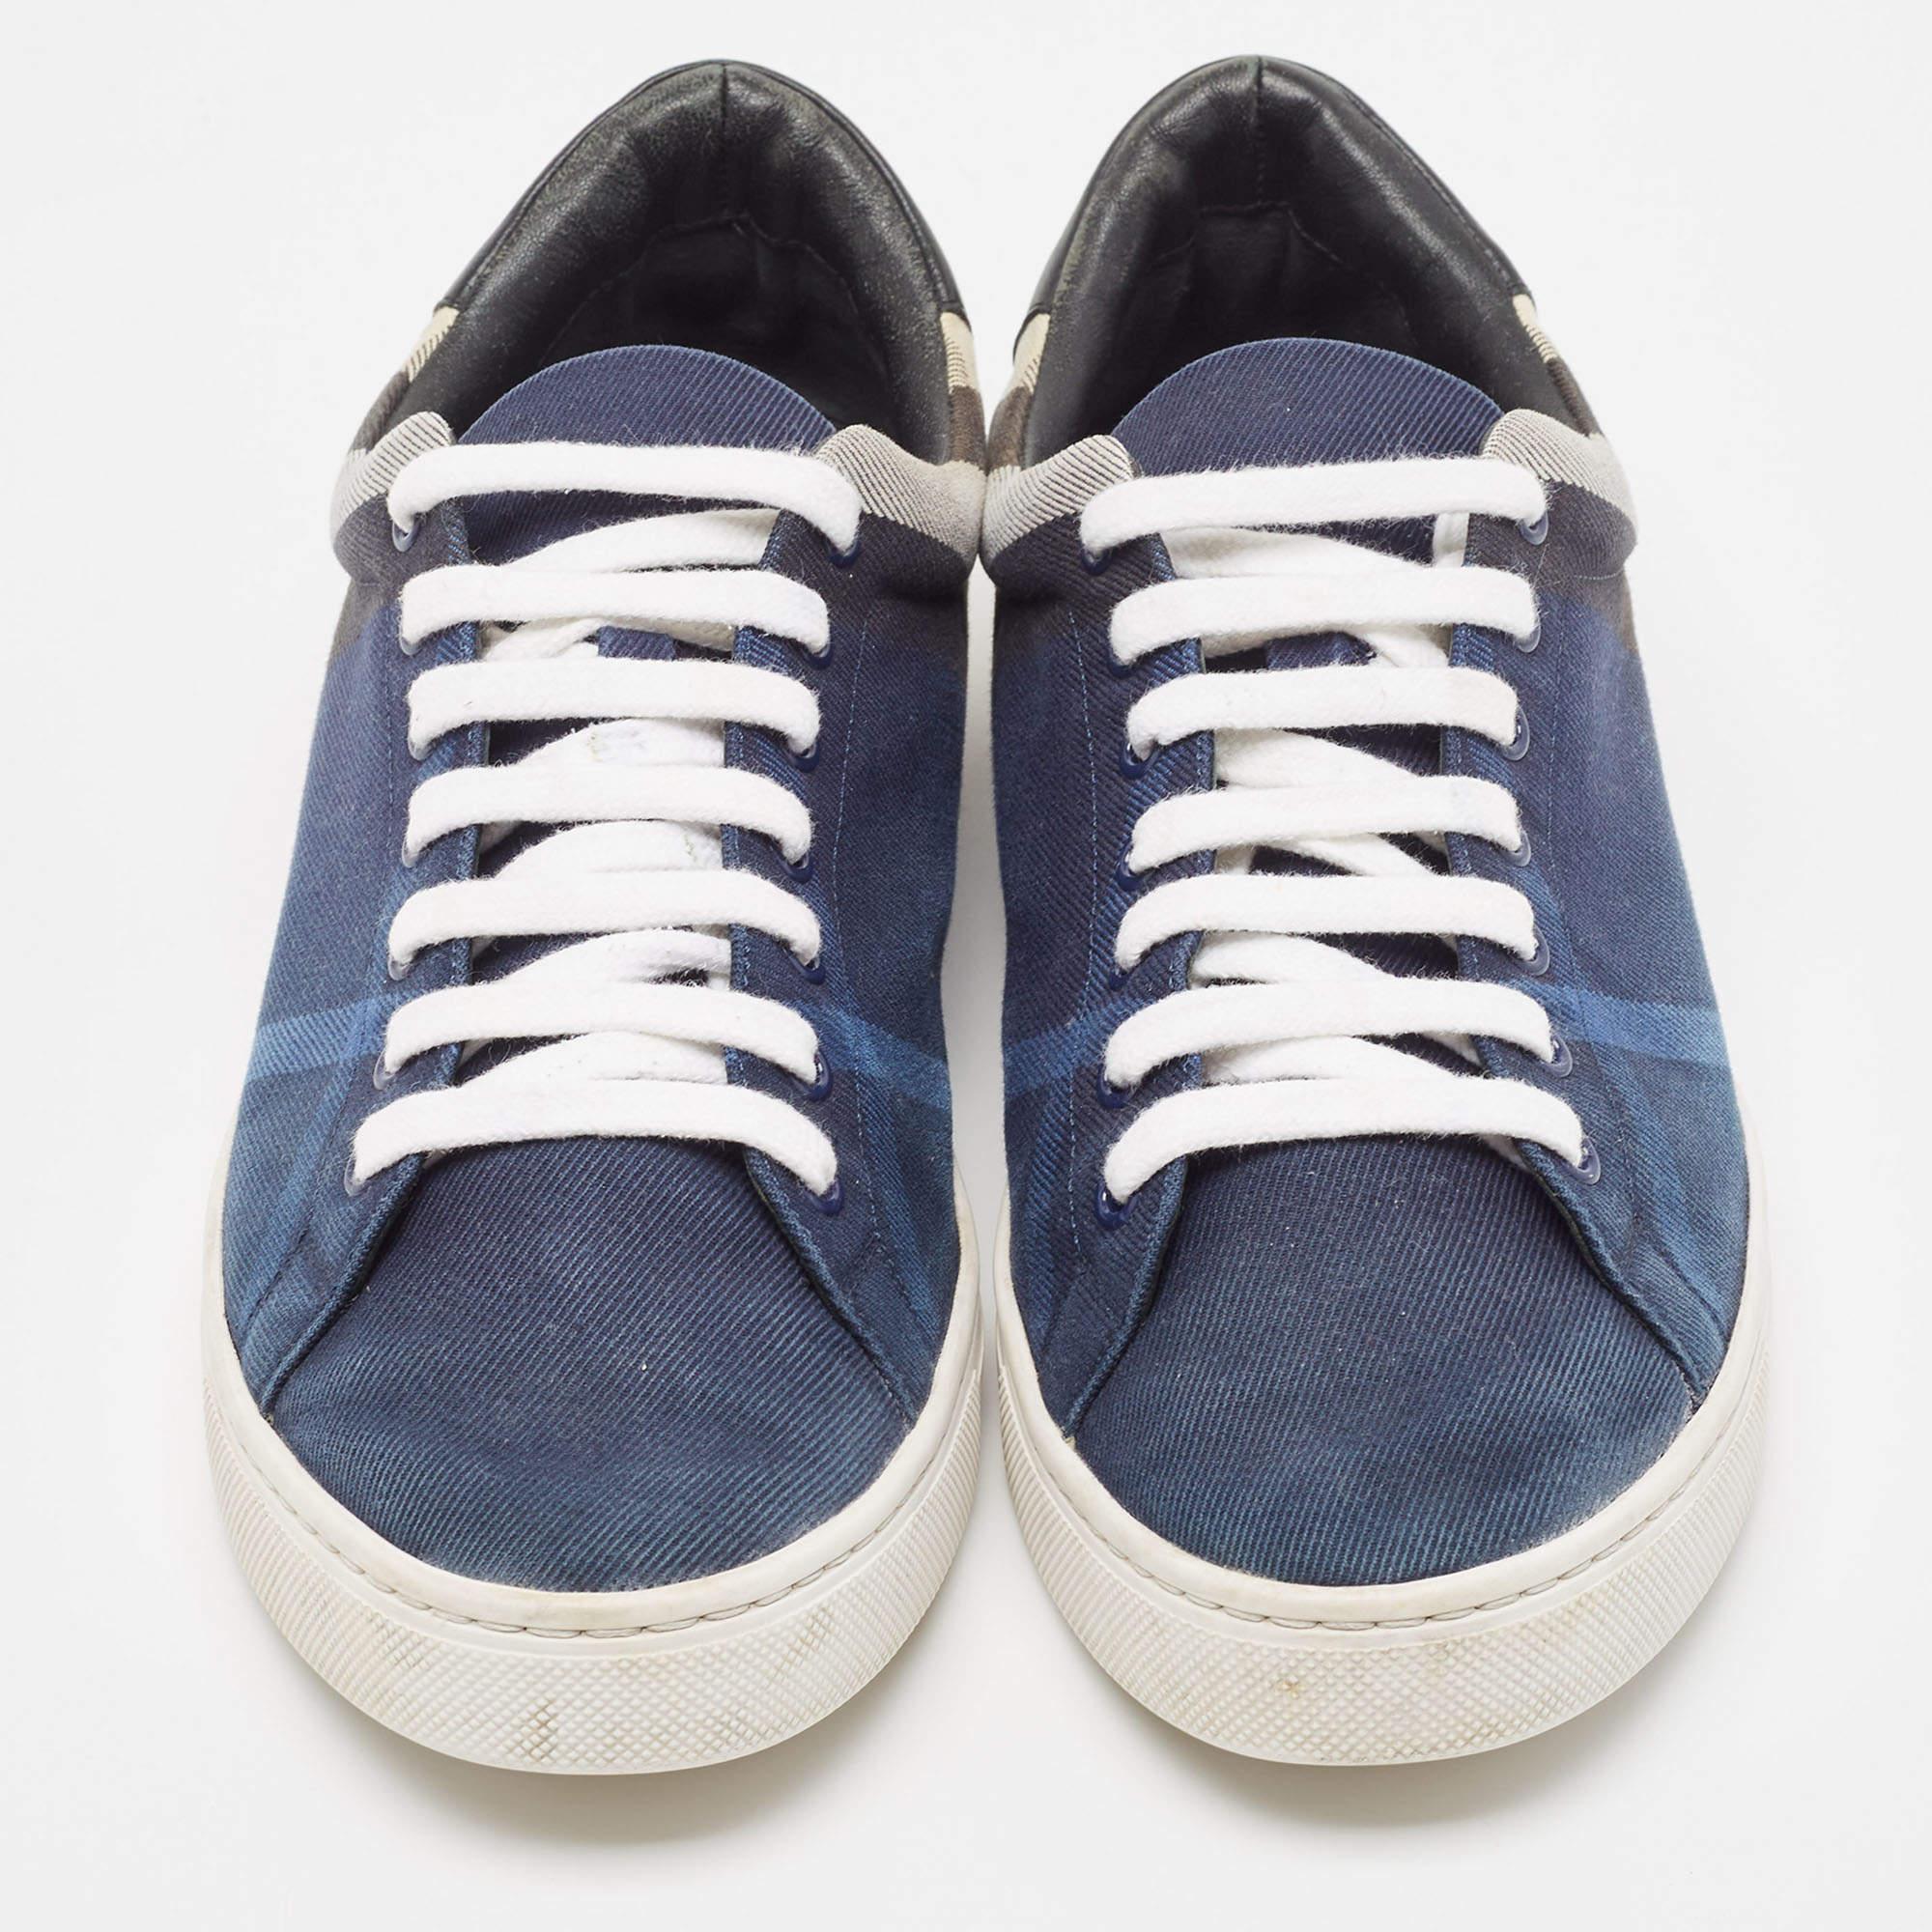 Burberry Blue/White Nova Check Denim and Leather Low Top Sneakers Size 44 For Sale 4